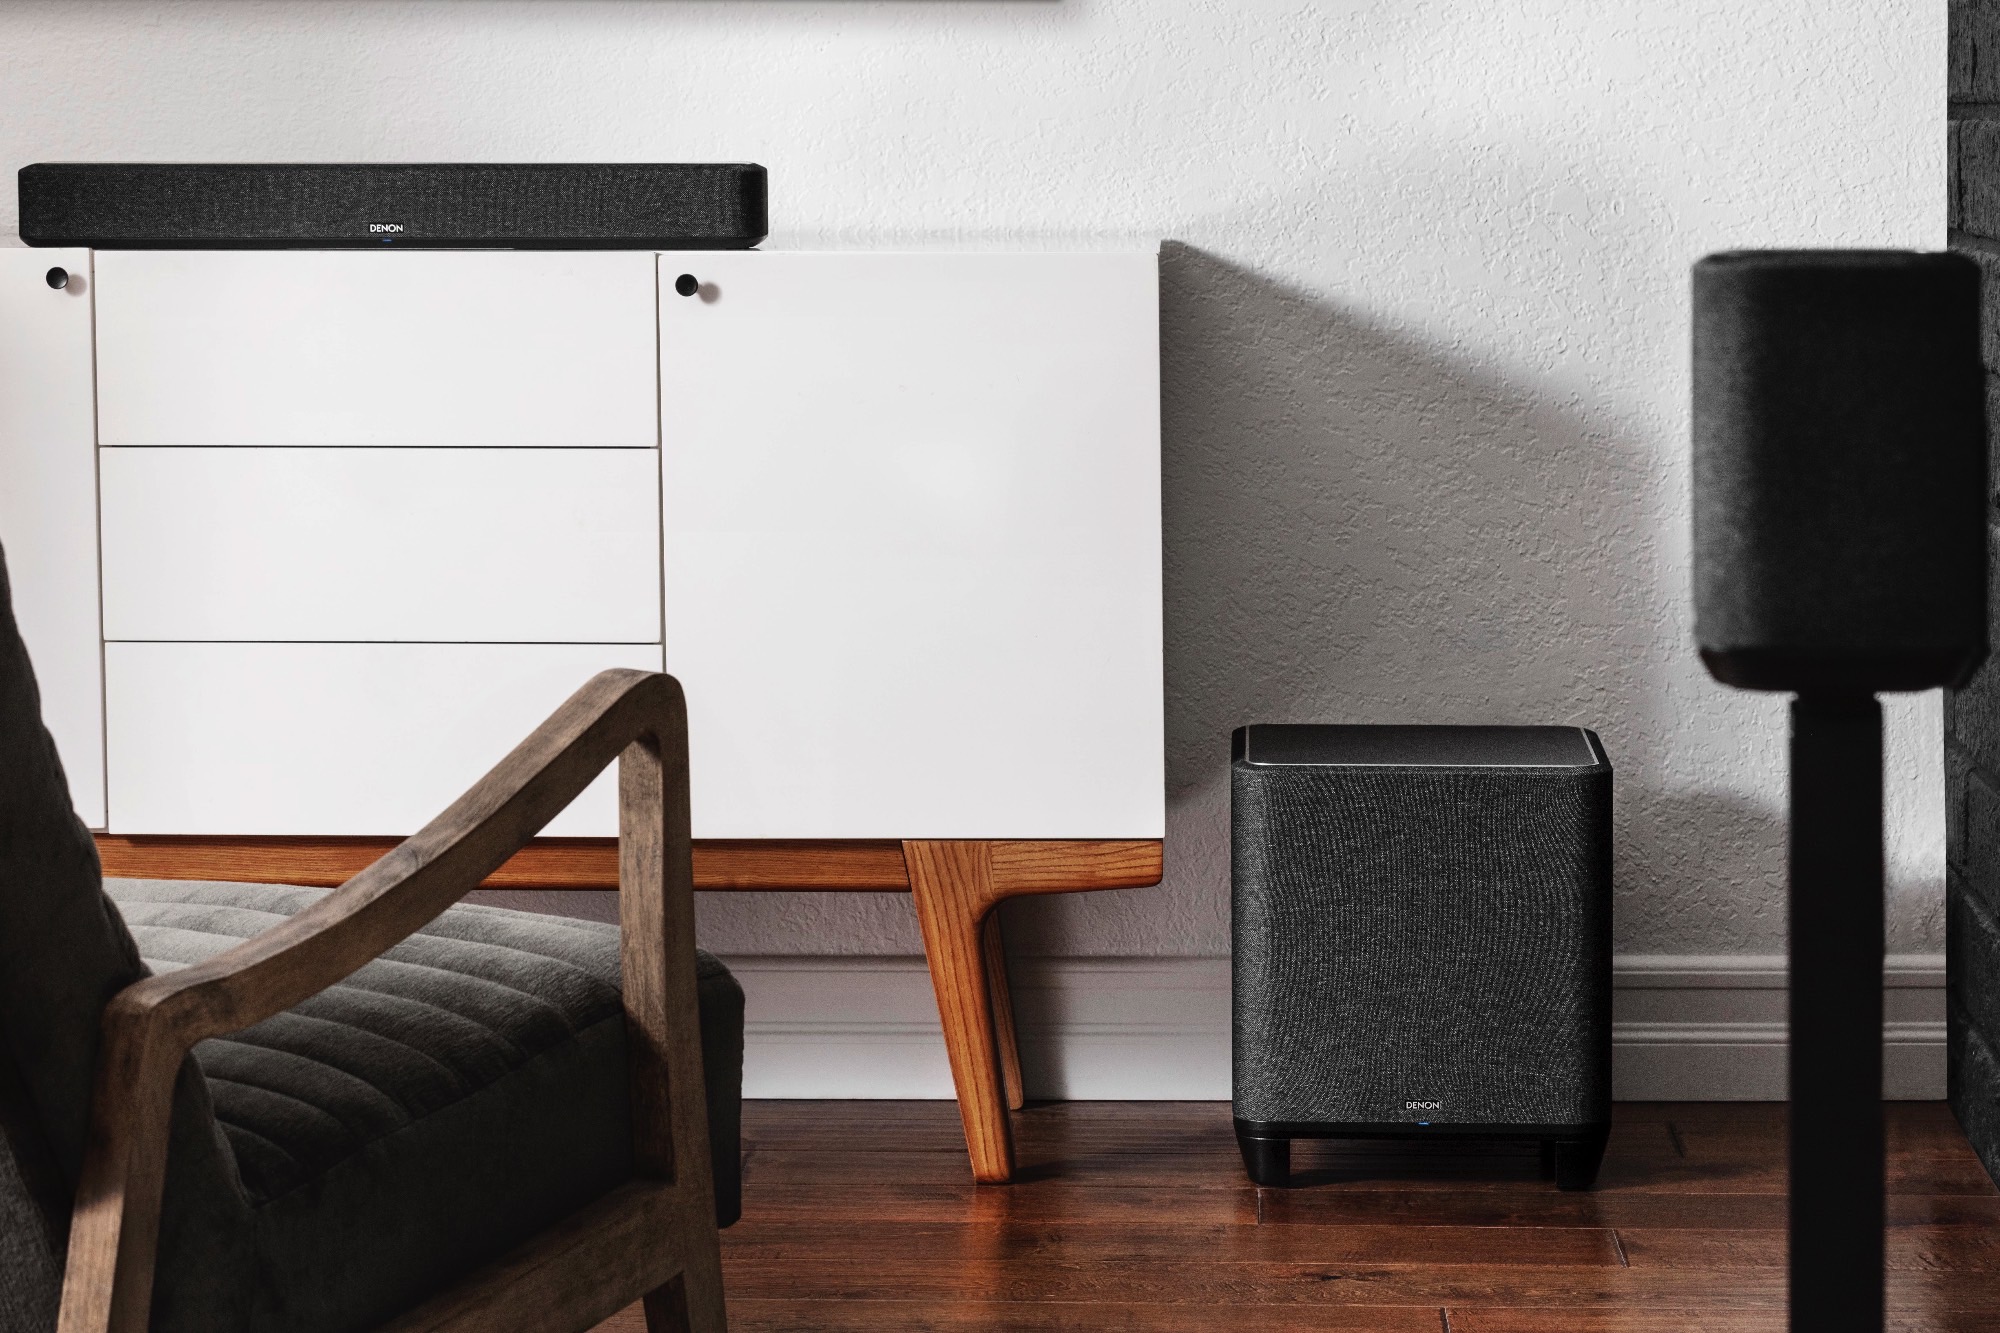 How to place and set up subwoofer Trends